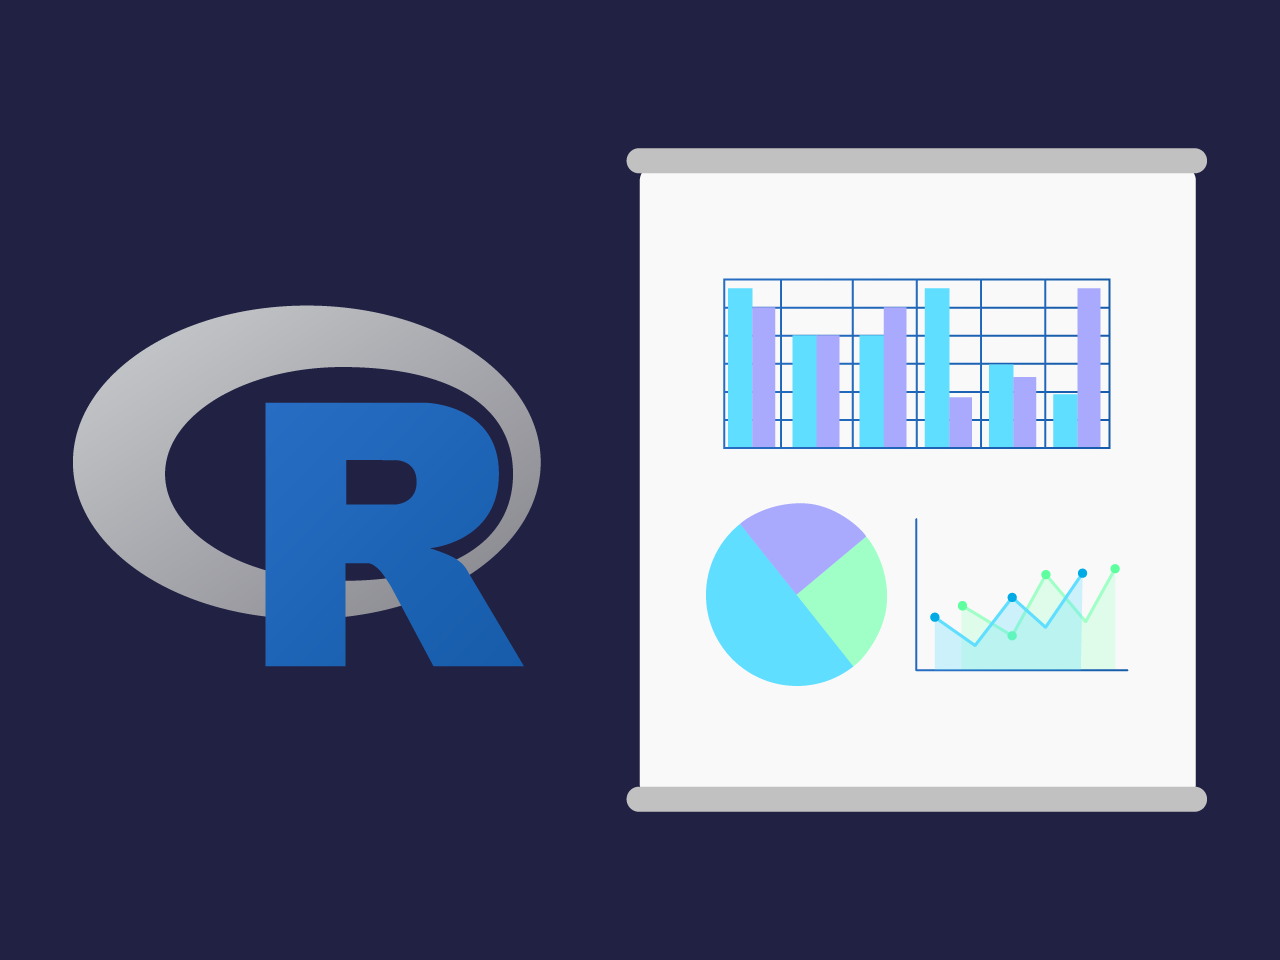 Data Visualization with R Image